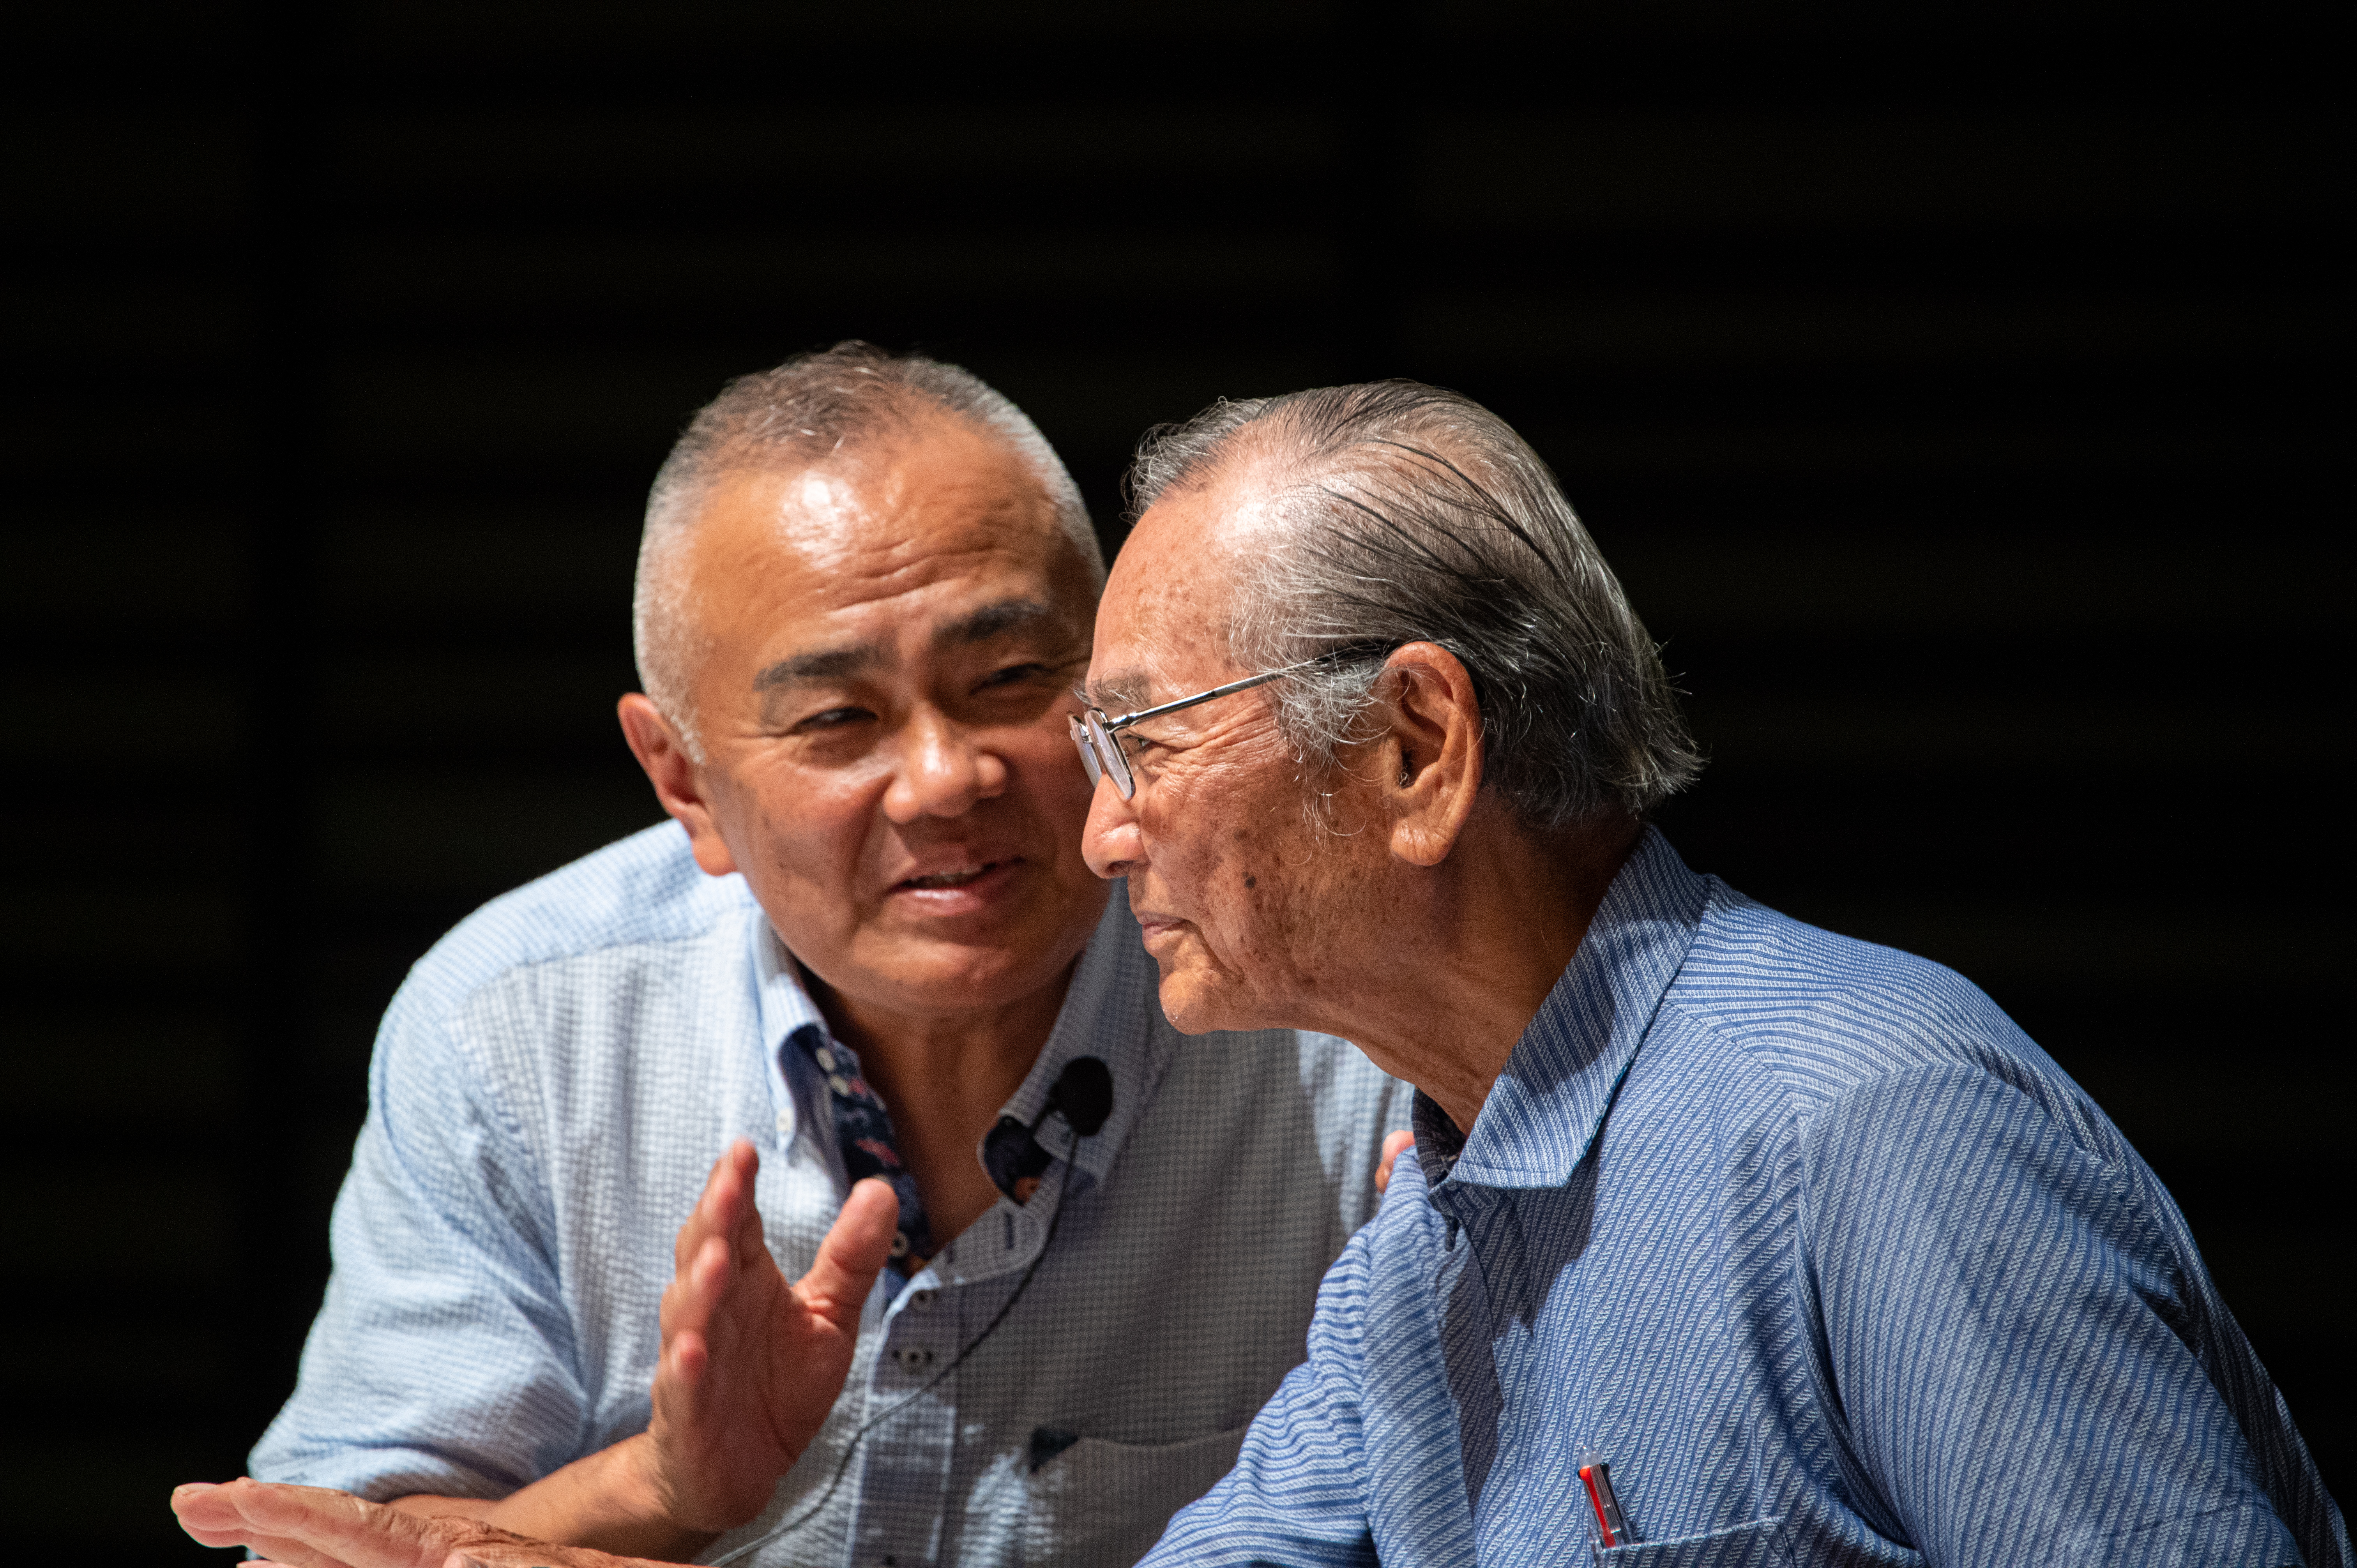 Learn About Okinawa's History: A Historian and Elderâs Insights on the Battle of Okinawa